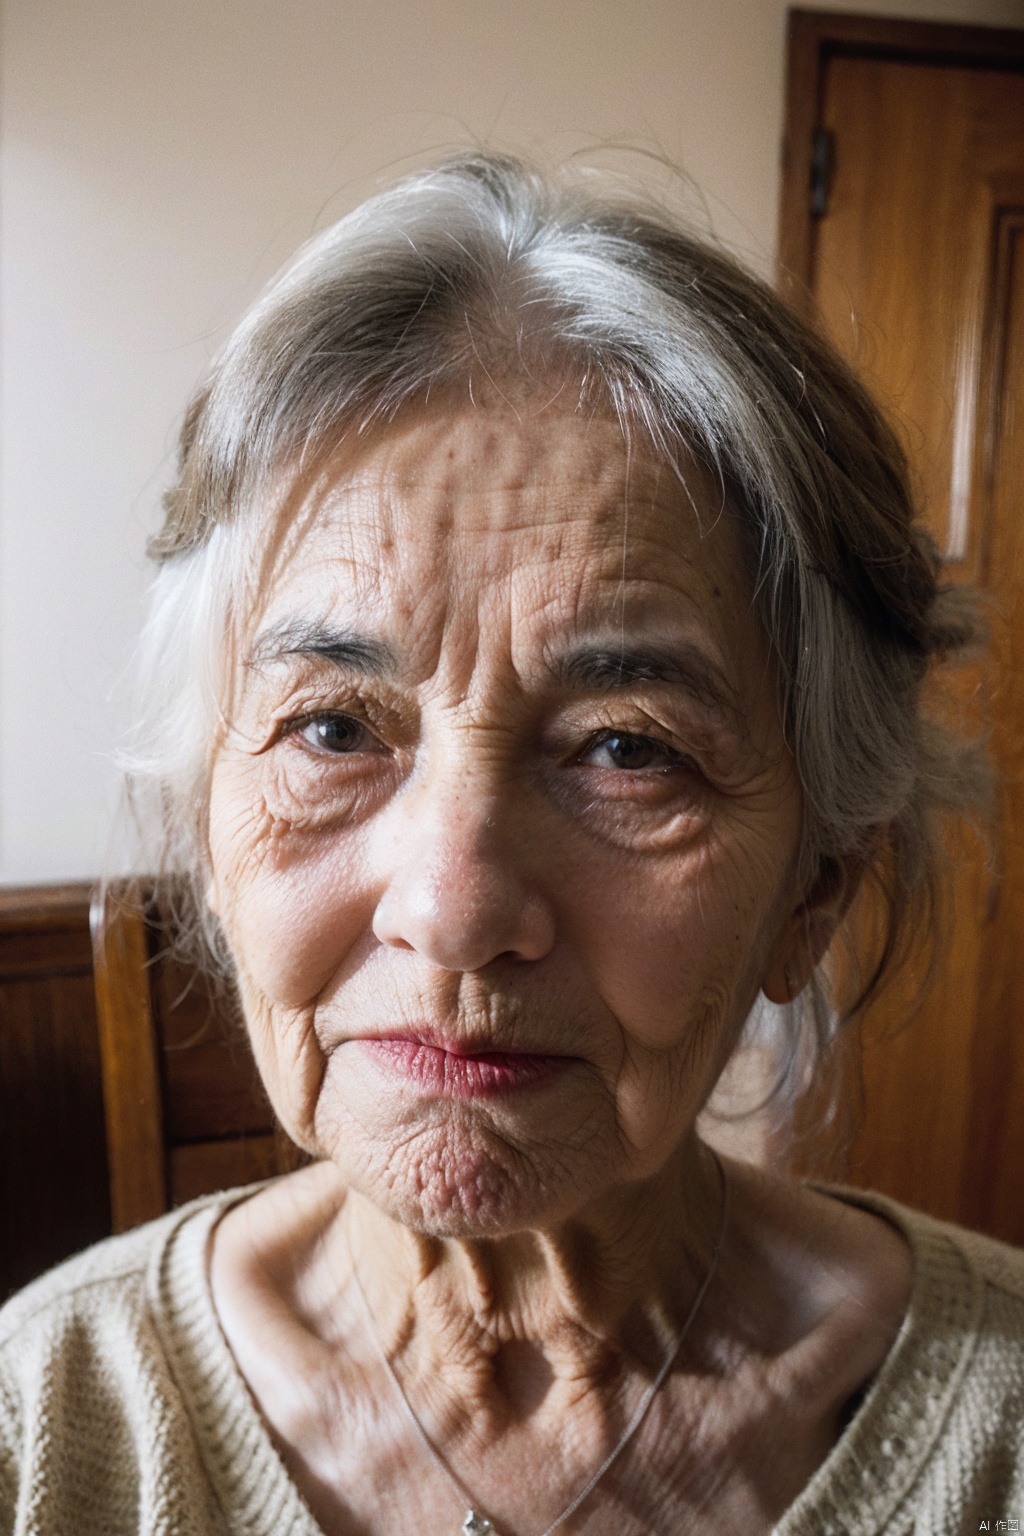  HUBG_Film_Texture, hyperrealism,
photograph of a old women